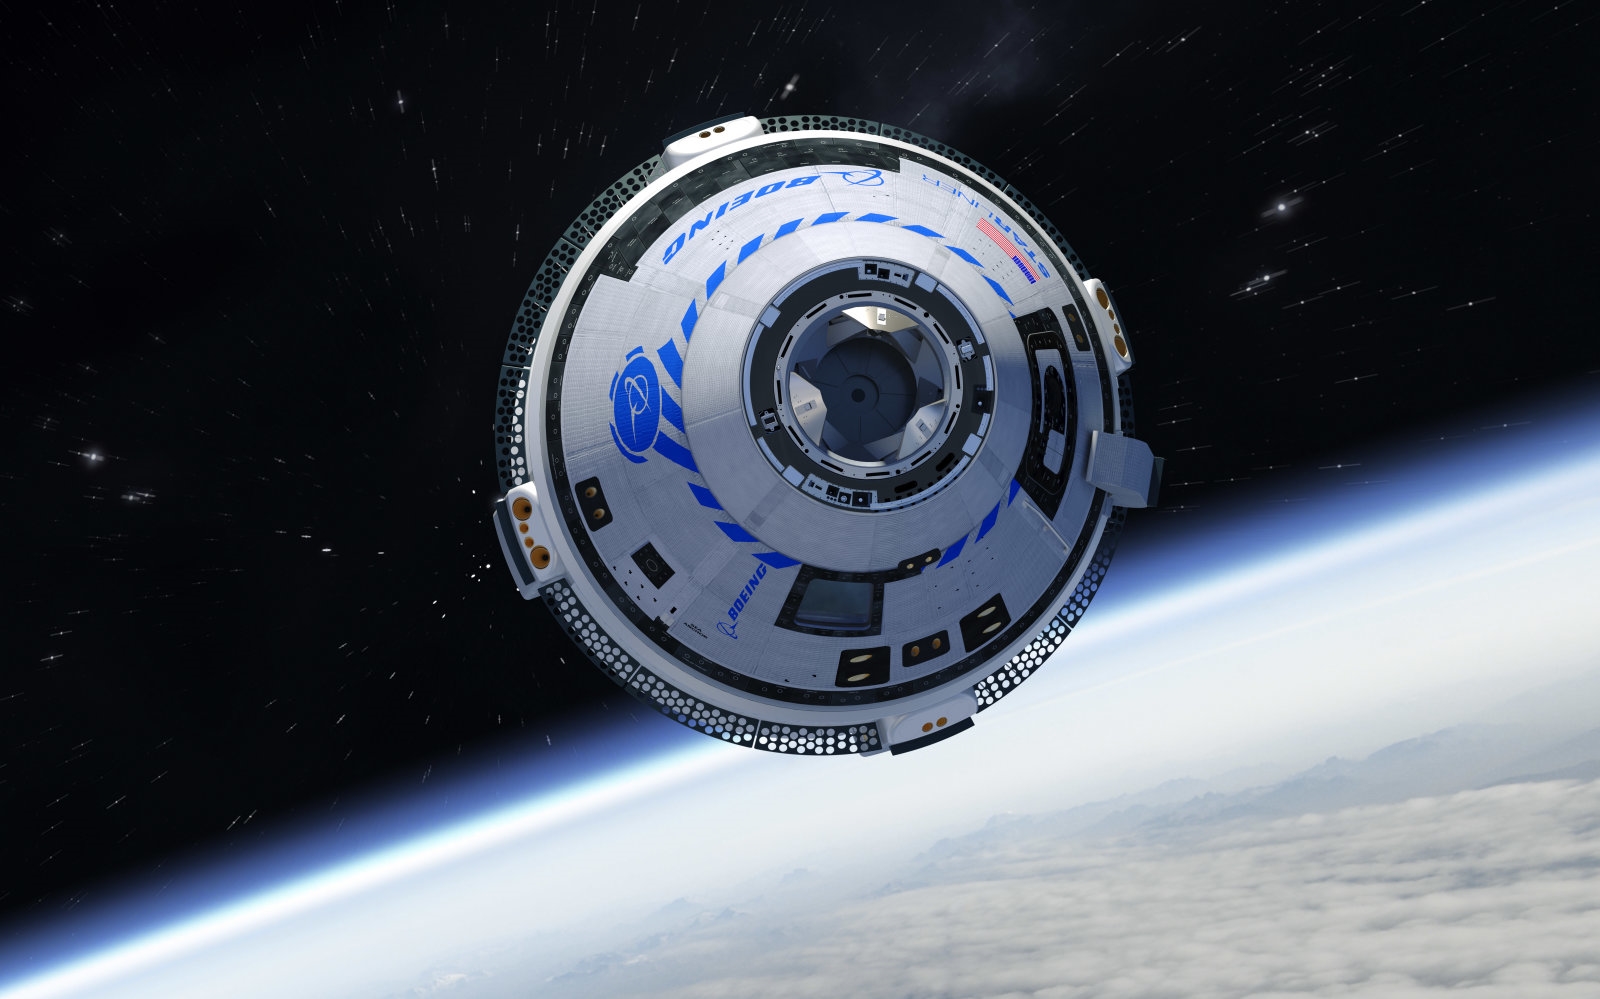 Boeing’s Starliner will not reach the ISS in its first test flight | DeviceDaily.com